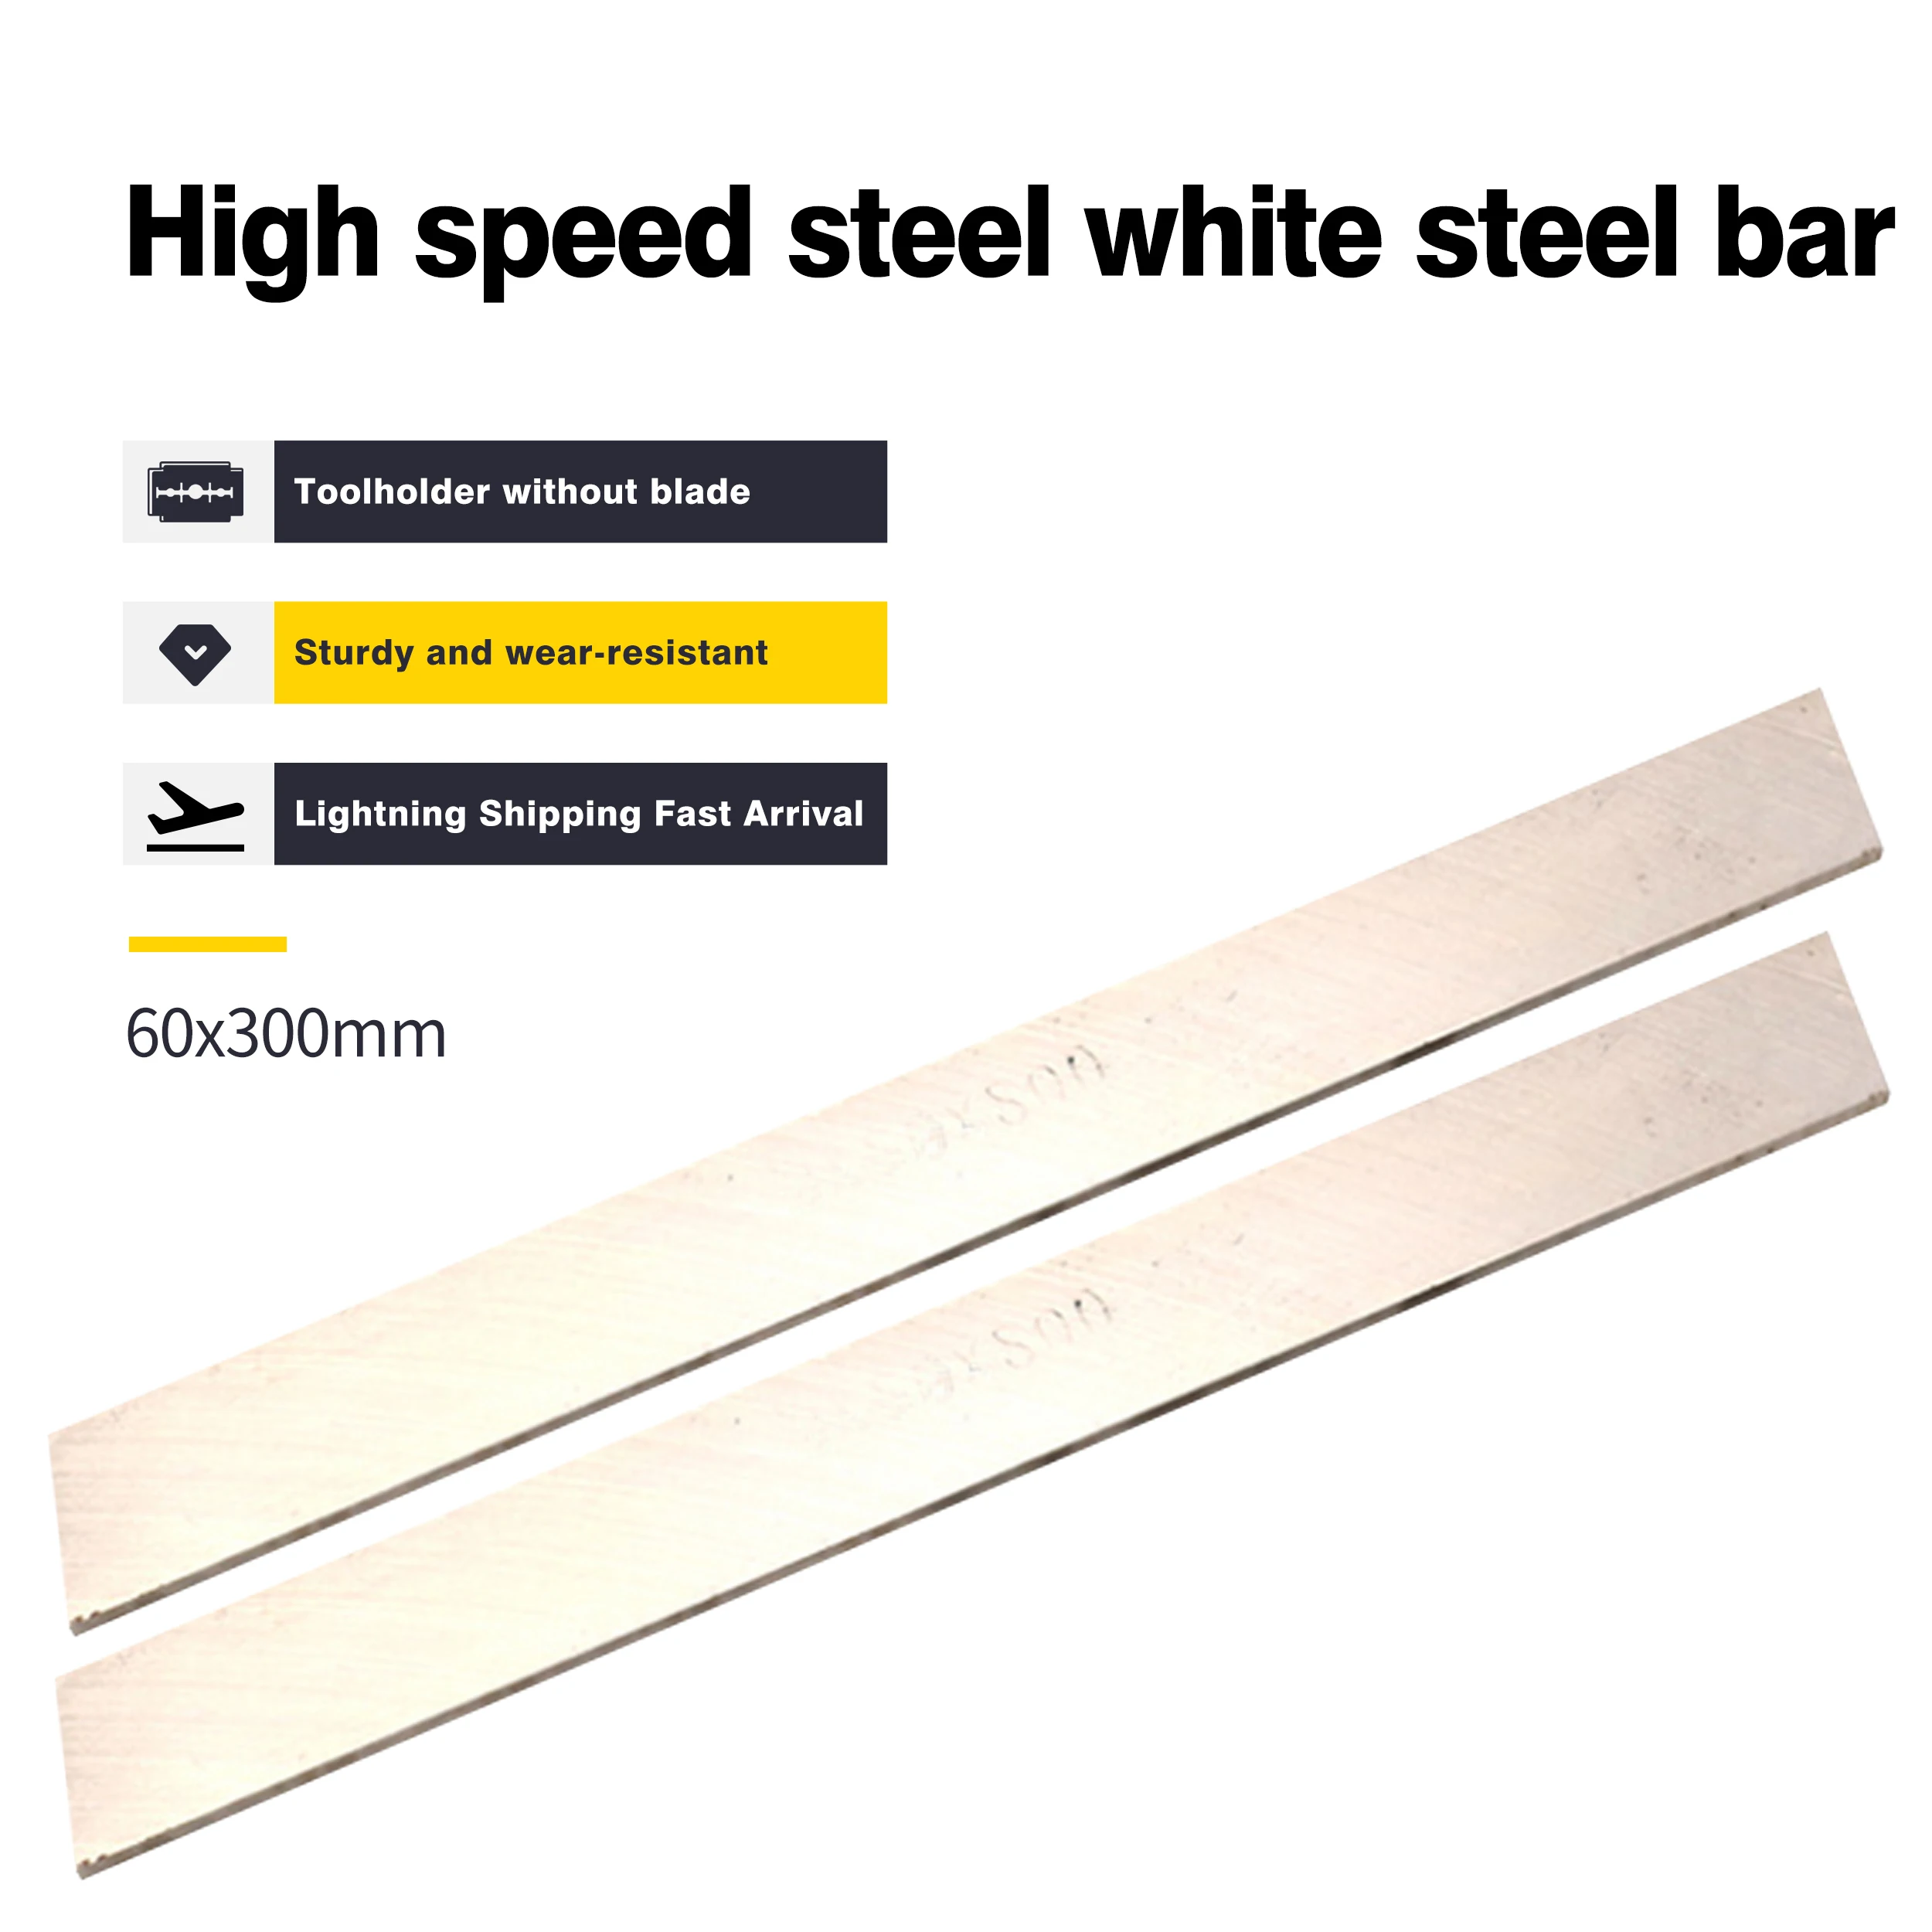 60x300mm High-speed White Steel Knife Blank High-performance Welding CNC Turning Multifunction DIY Tools Powerful Wearable Blade